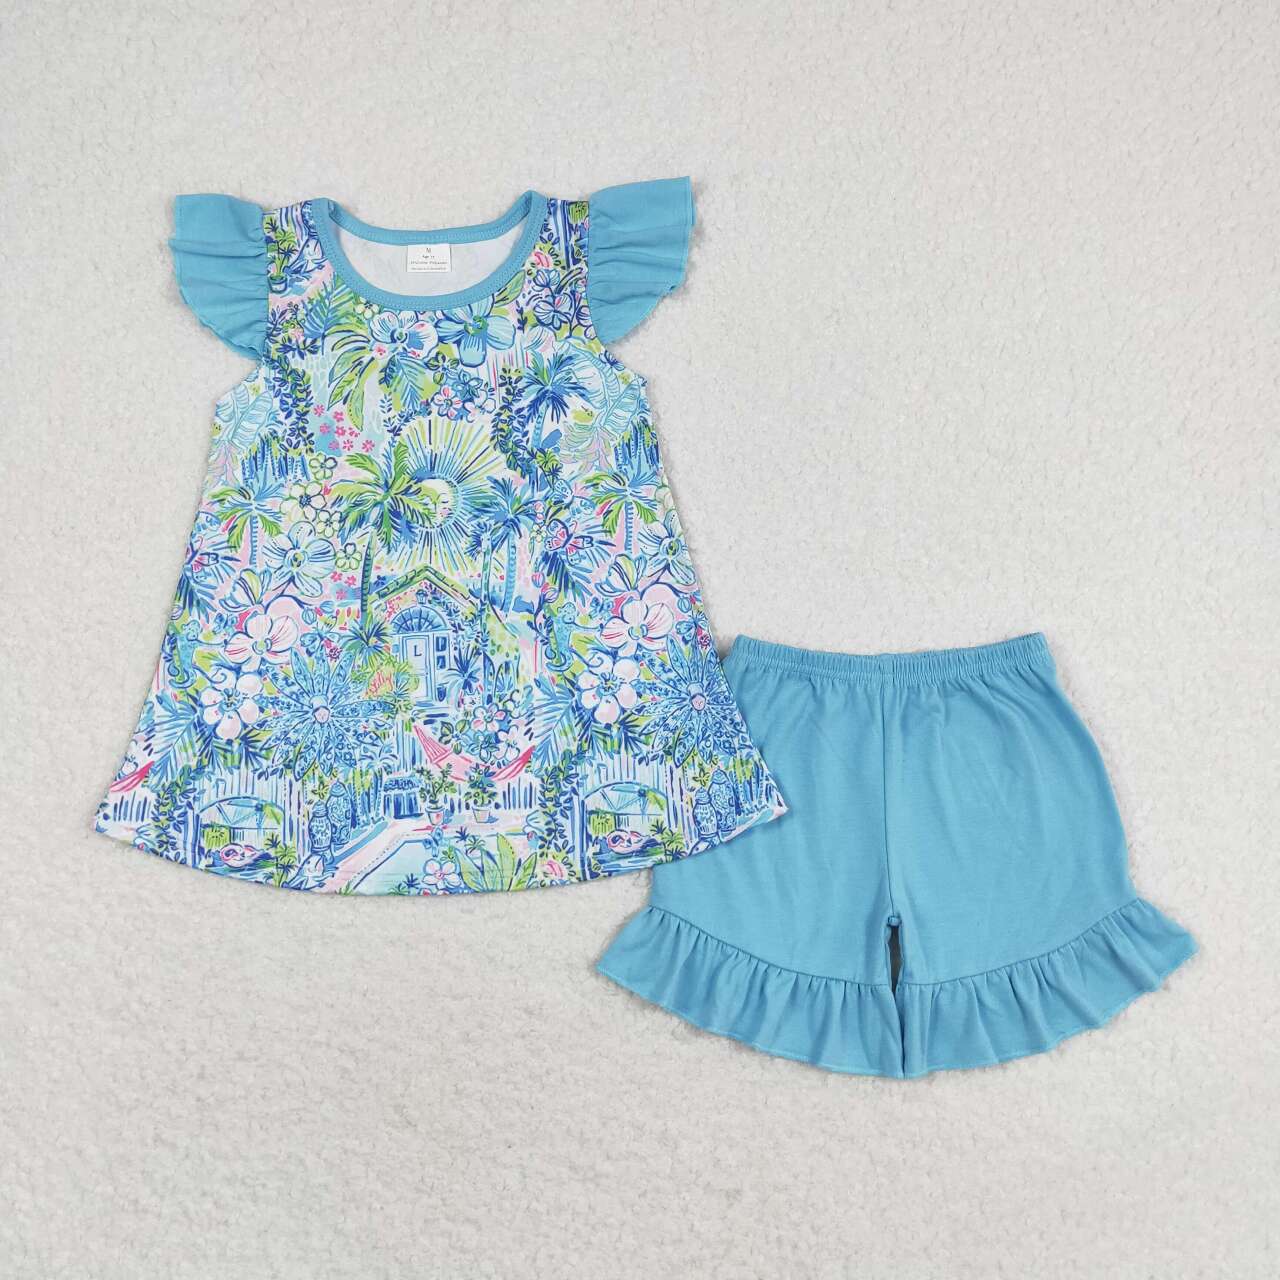 Blue flowers print RTS sibling clothes